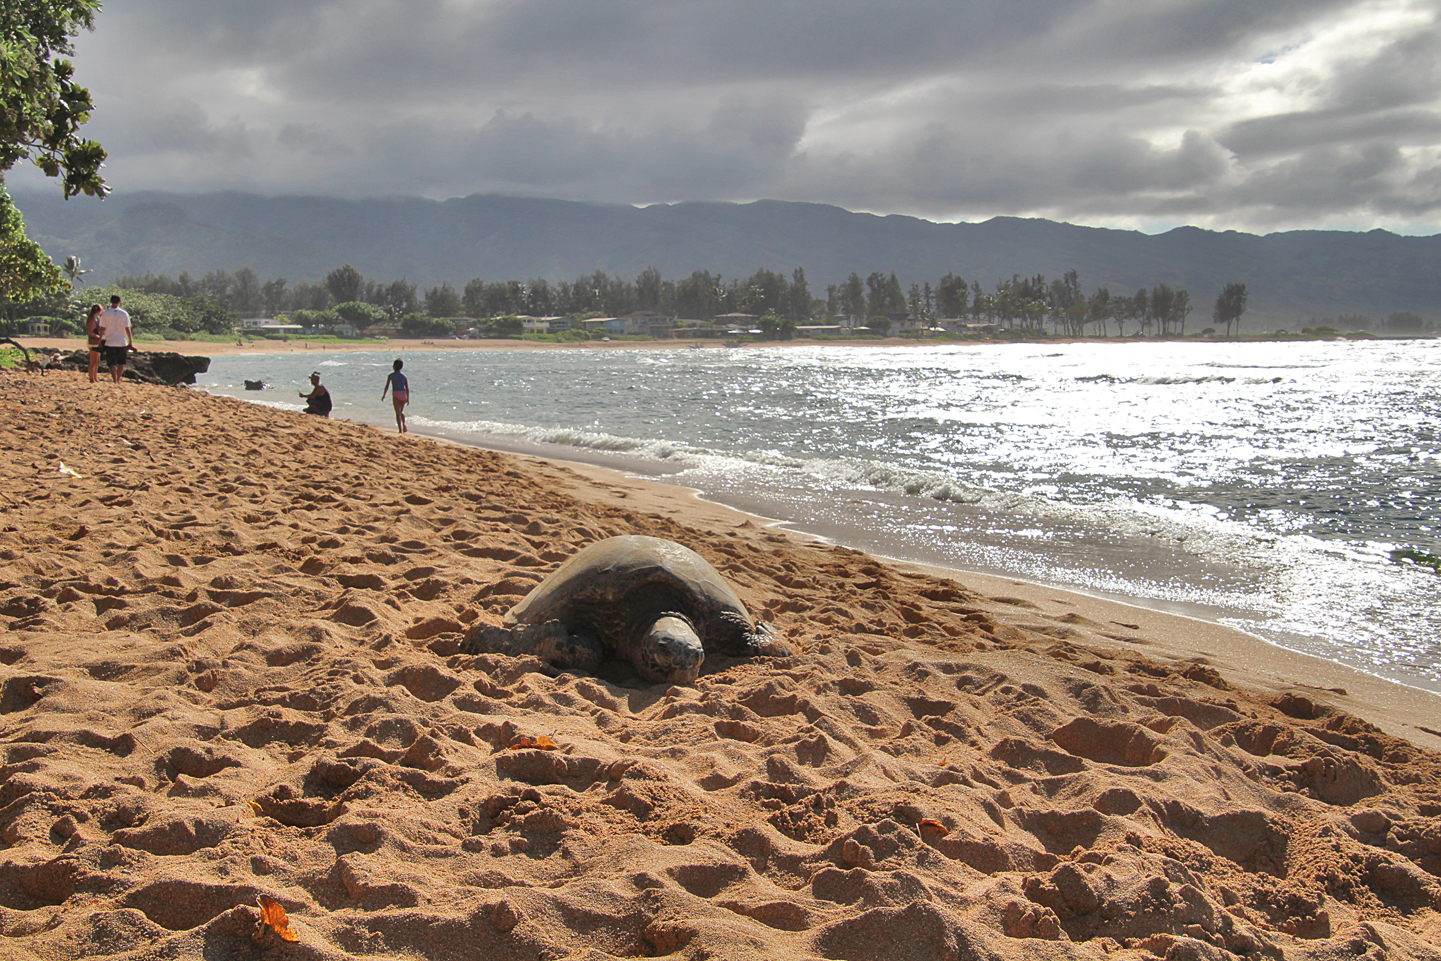 Hawaiian Monk Seal on the beach. This one's name is Honey Girl. She is the mother of Ipo.